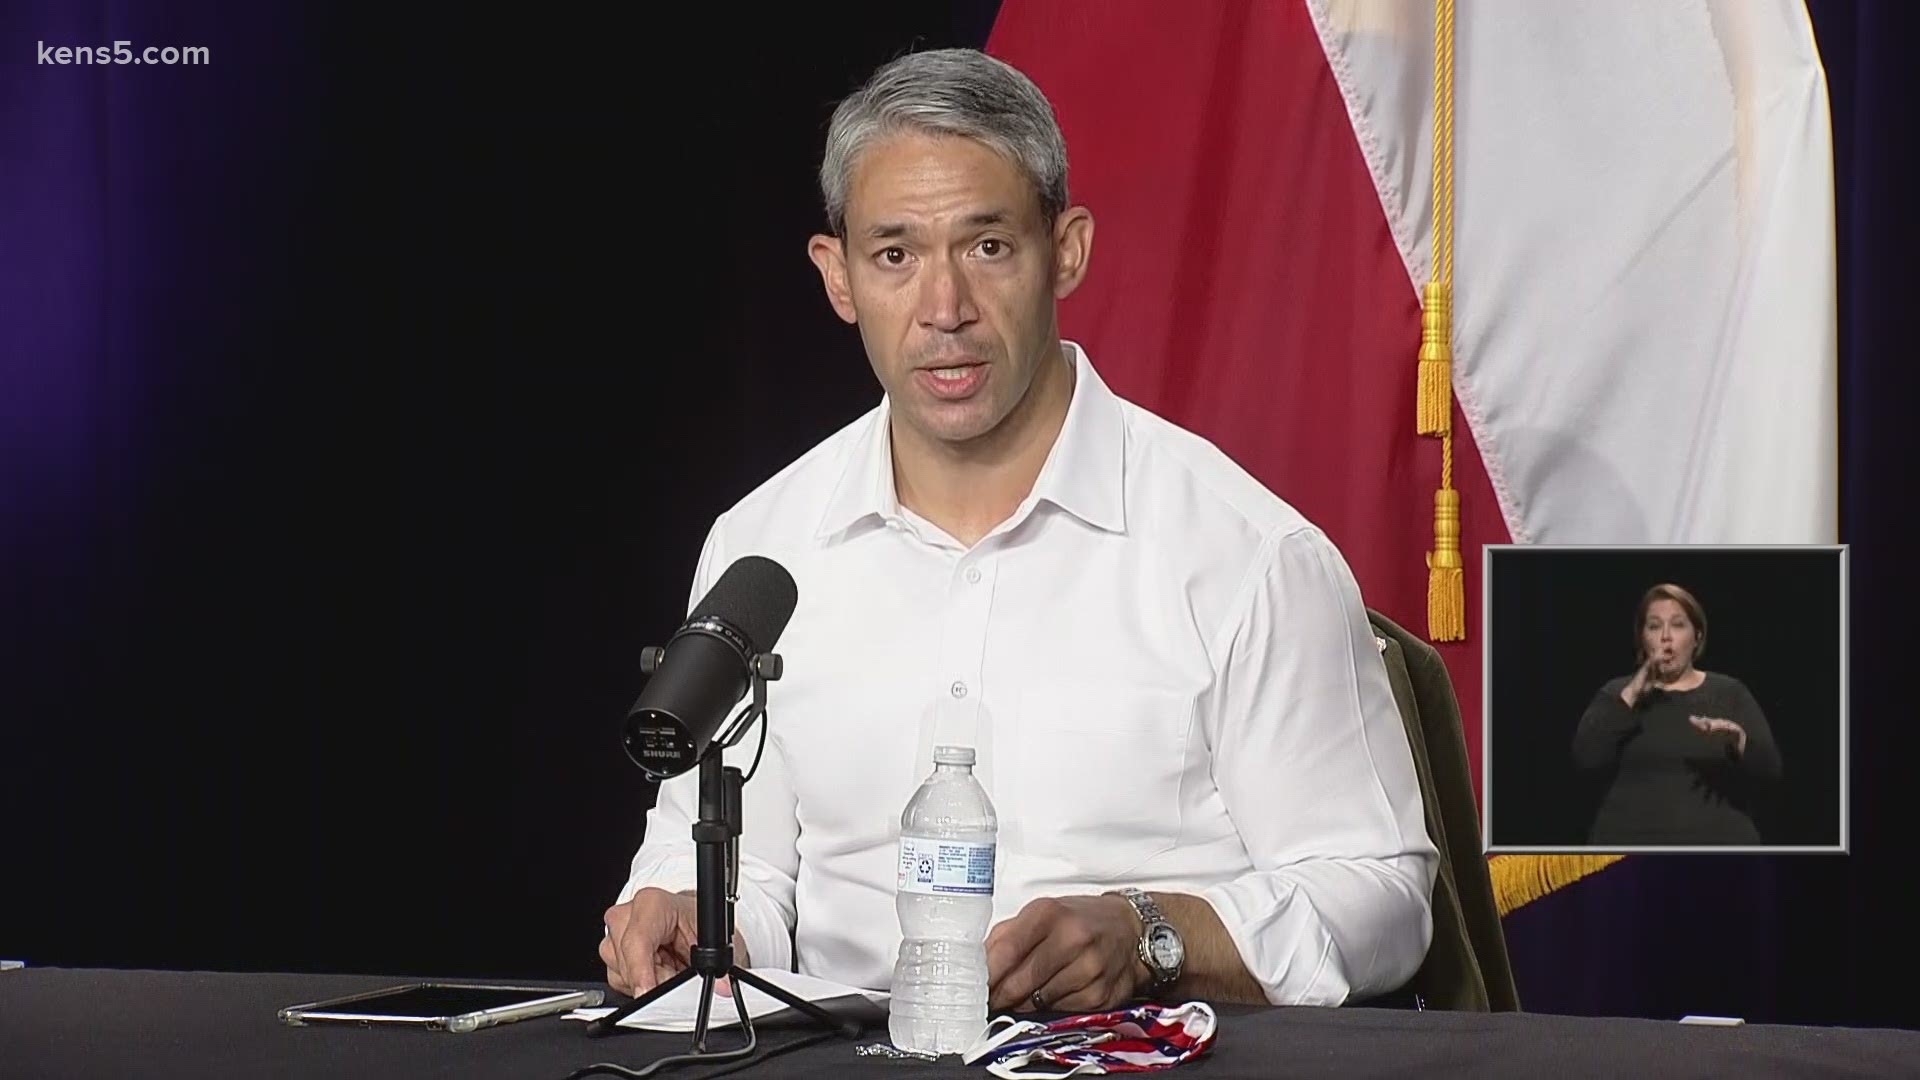 Mayor Nirenberg reported 177 new cases, bringing the total to 53,971. Five new deaths were also reported, including a woman under 19 years old.